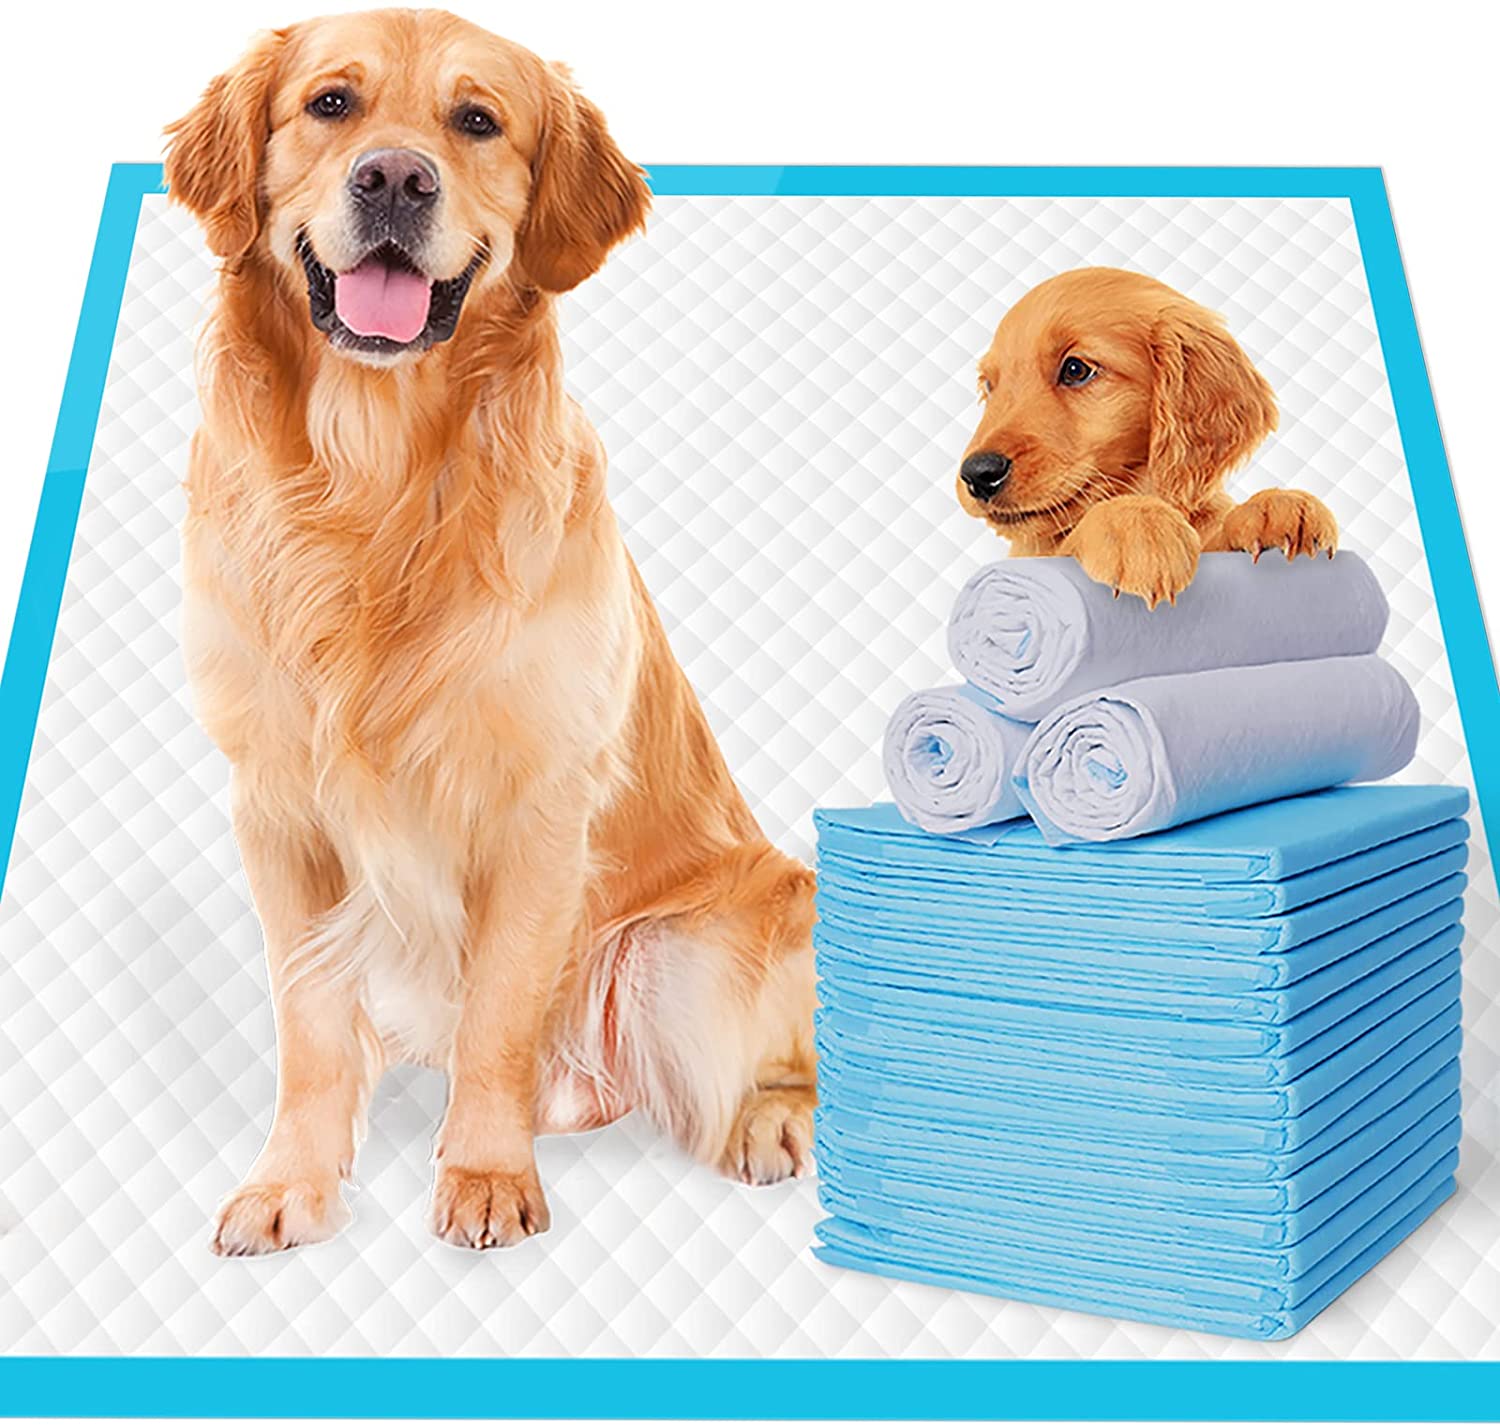 JOINPADS Dog Pee Pad, Puppy Potty Training Pet Pads Dog Pads Extra Large Disposable Super Absorbent & Leak-Free Pee Pads 28